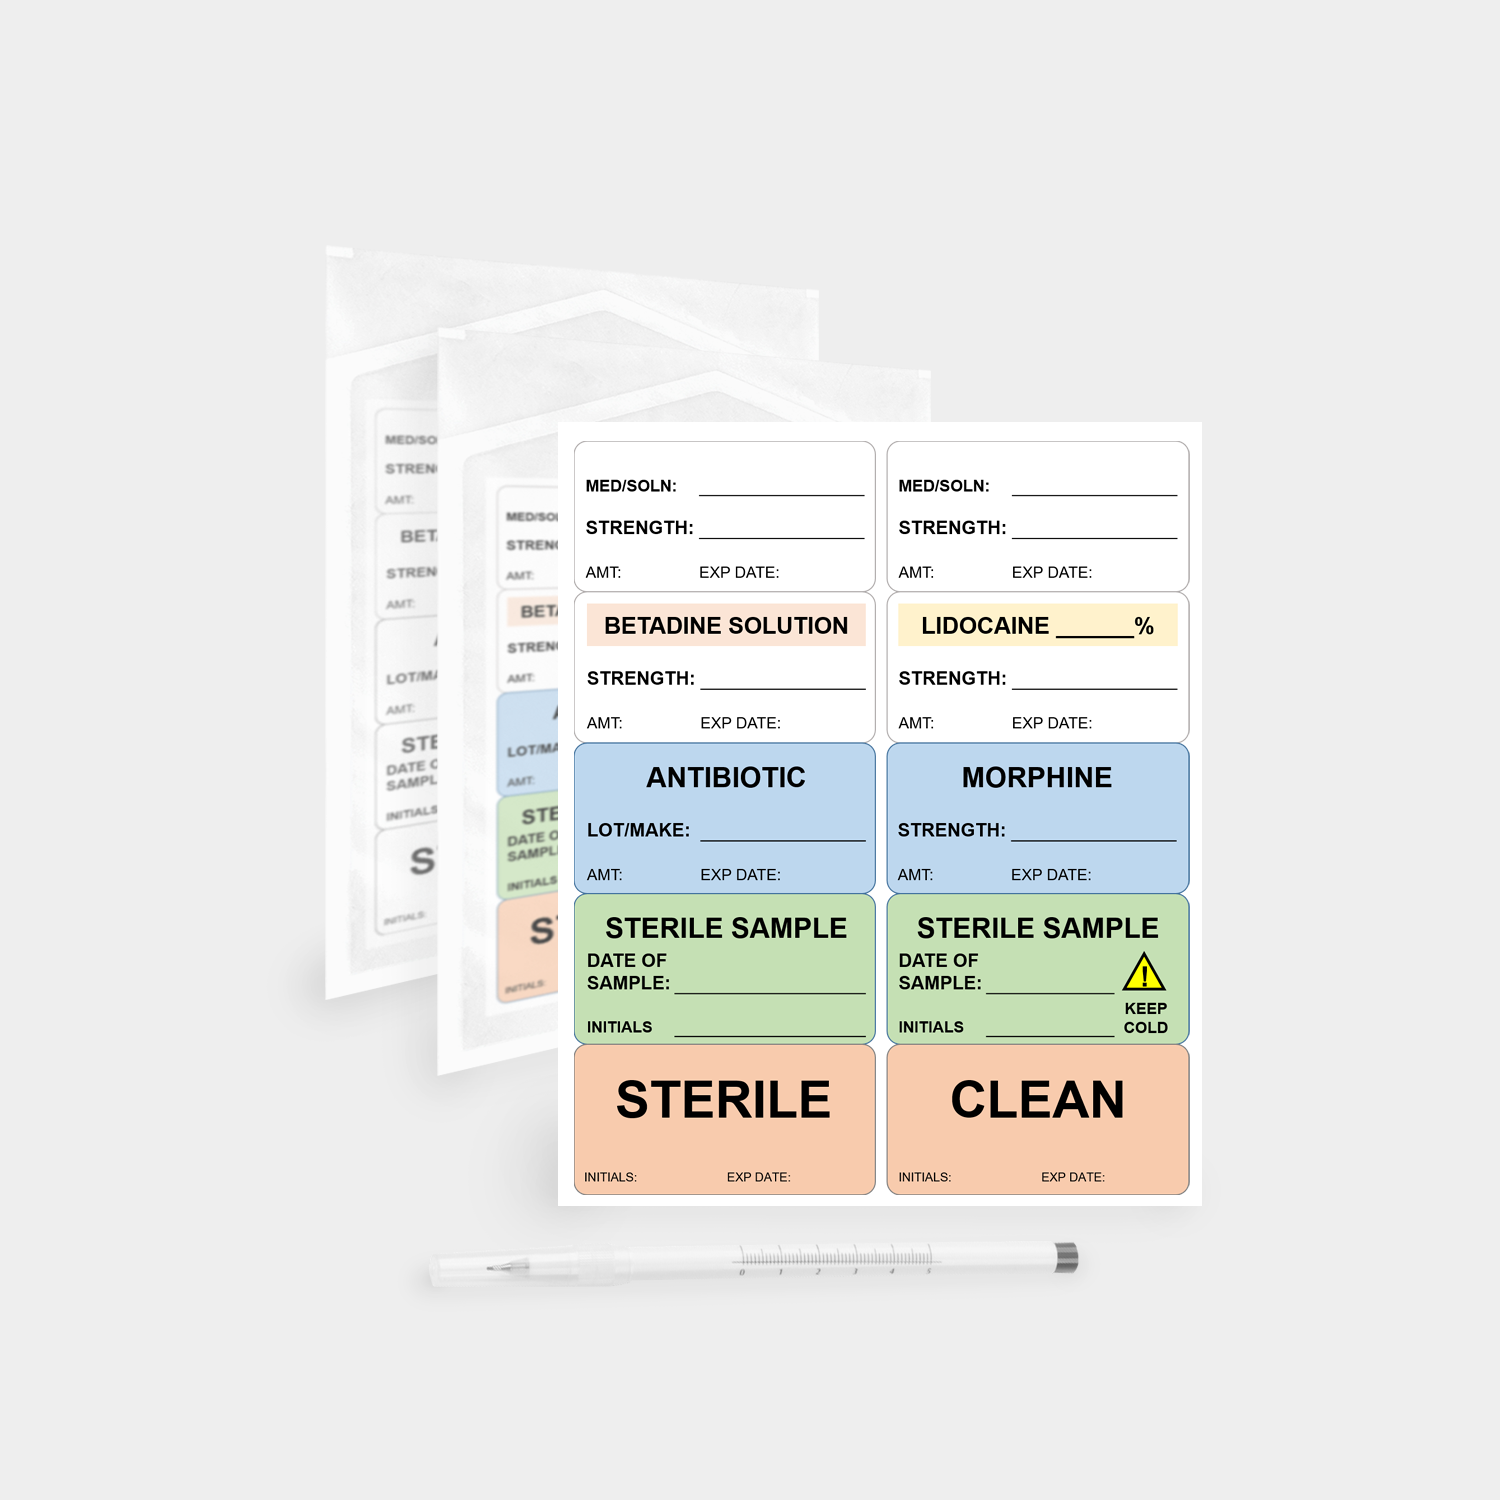 STERILE LABELS, TAGS AND MARKERS